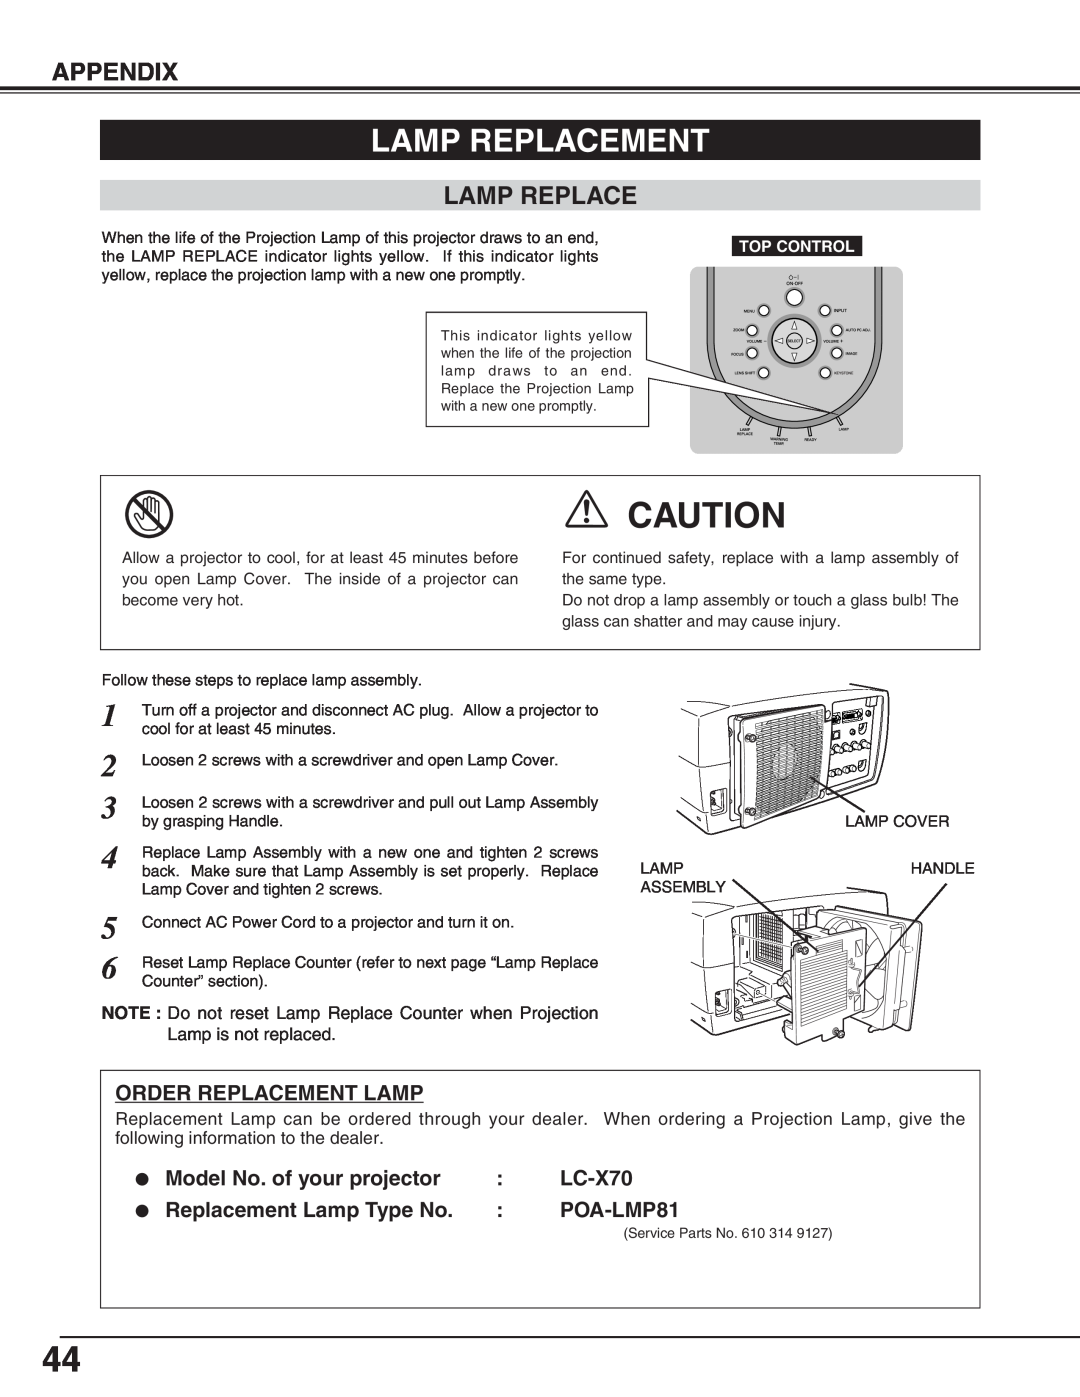 Eiki LC-X70 instruction manual Lamp Replacement, Appendix 